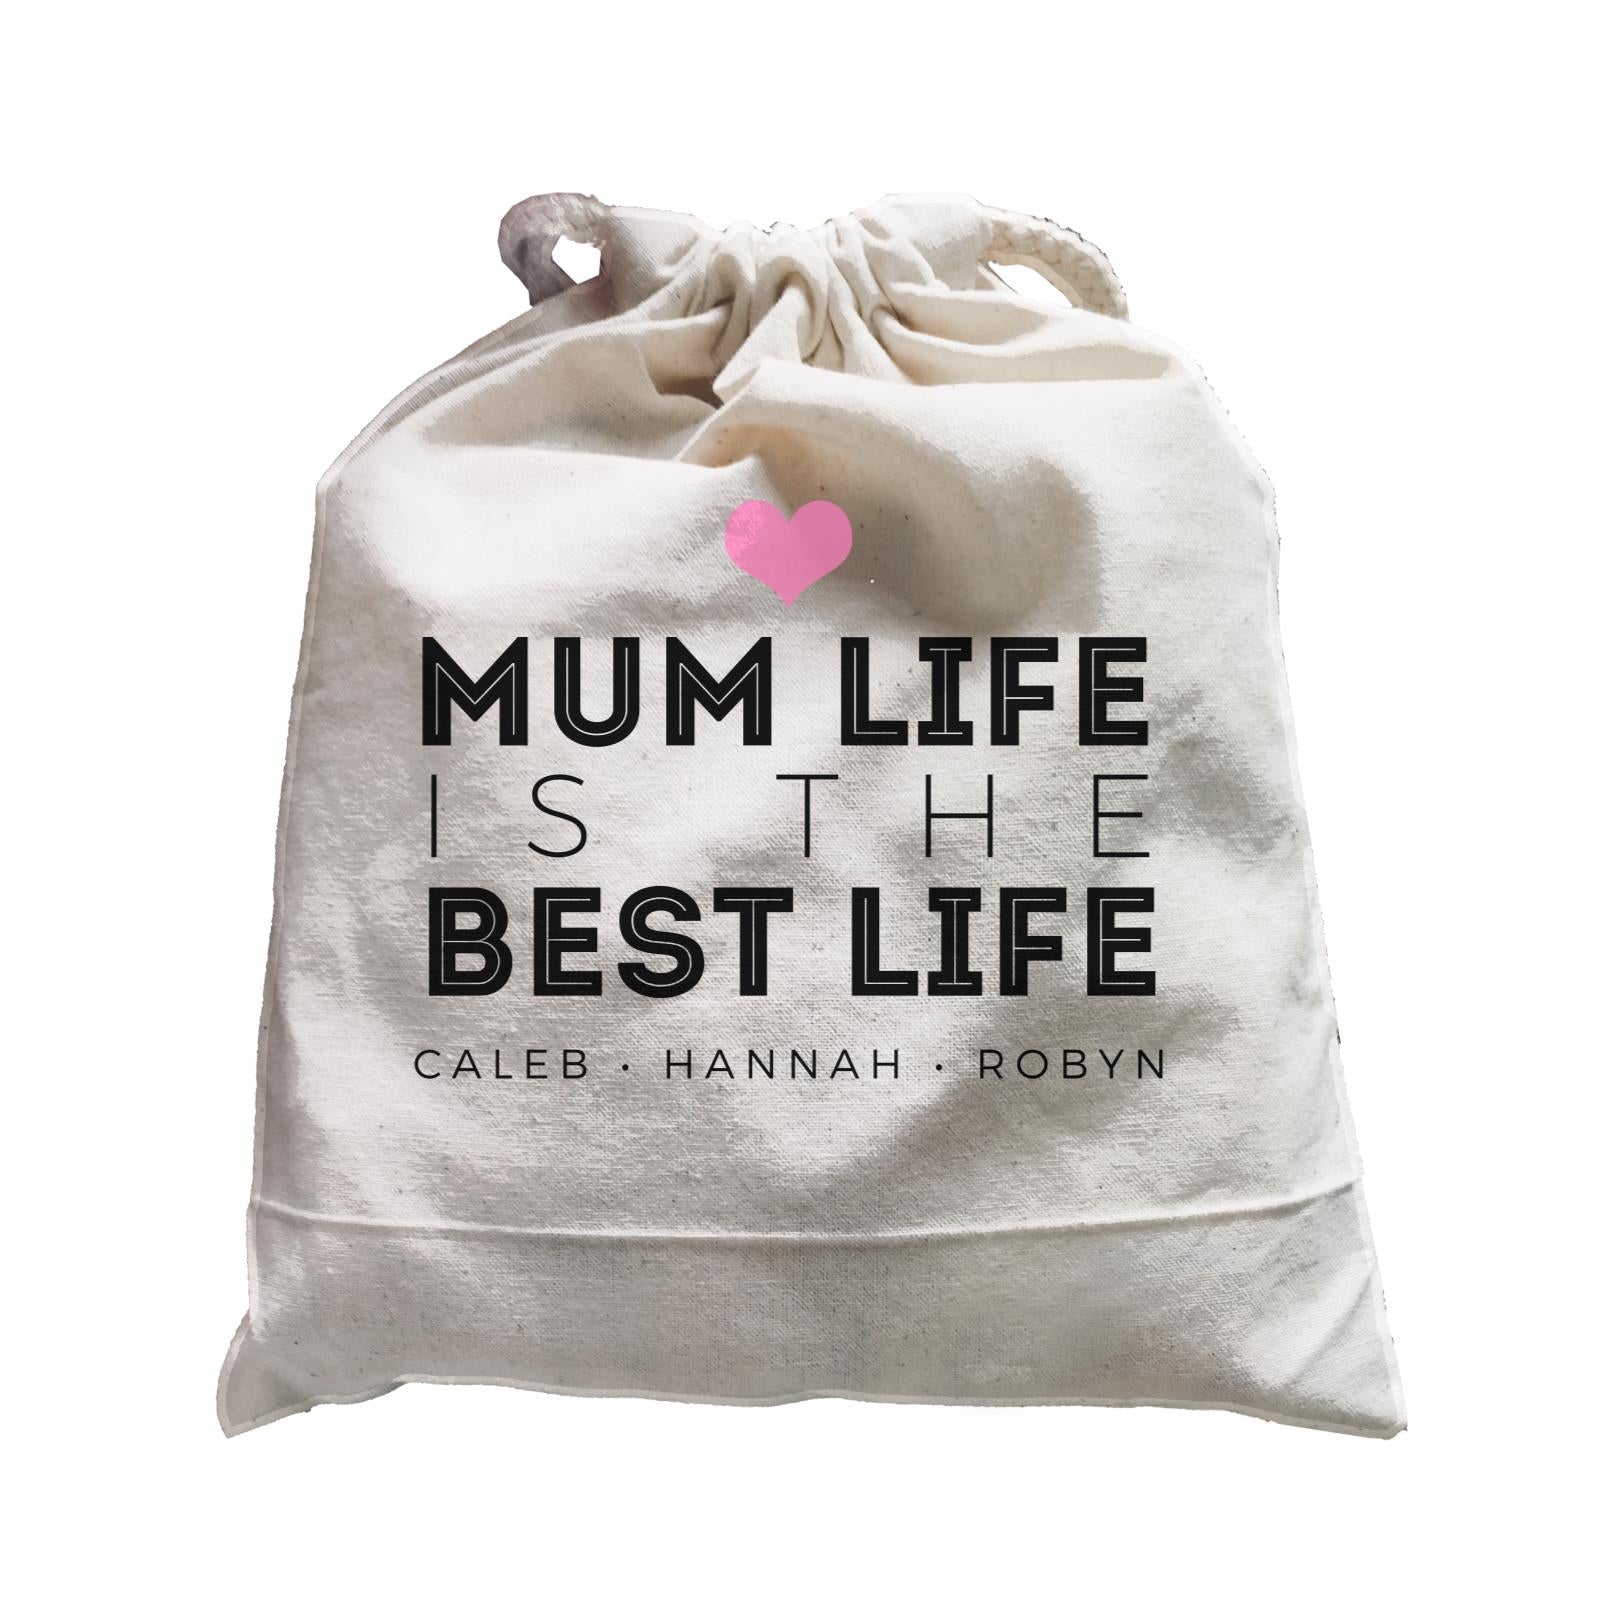 Mum Life Is The Best Life Personalizable with Text Satchel